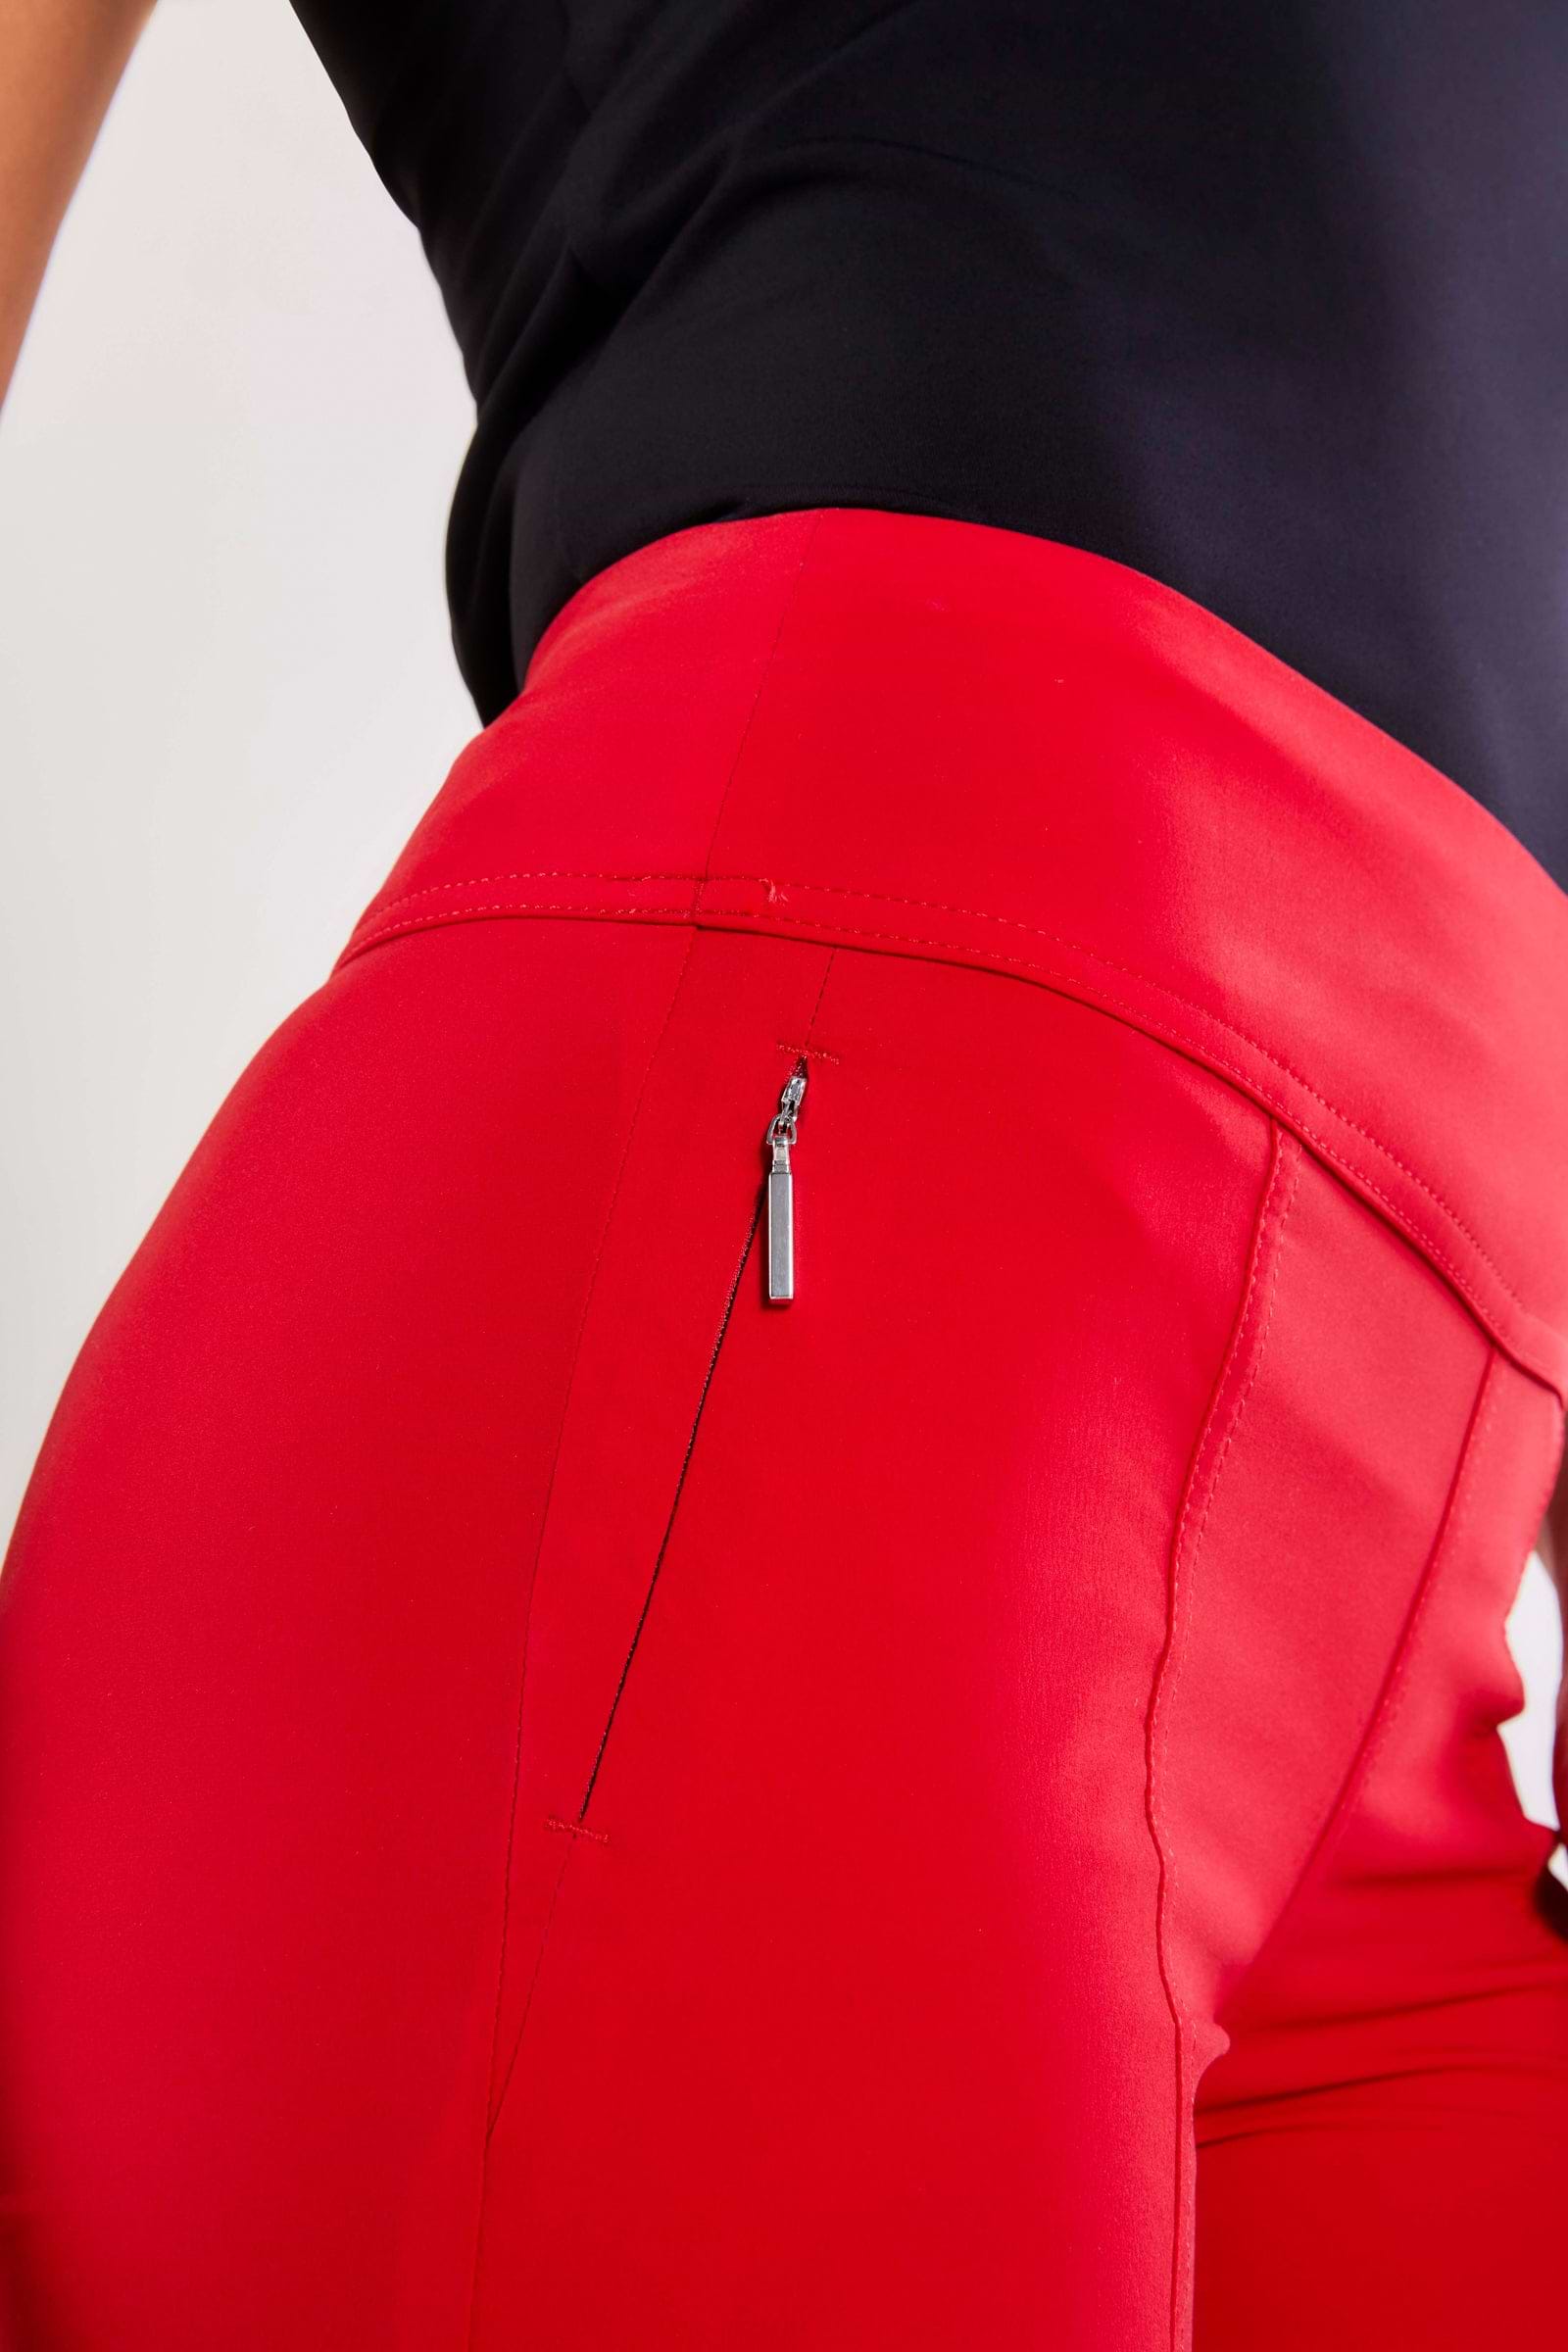 The Best Travel Pants. Front Zipper Pocket of the Allie Hybrid Pant in Atomic Red